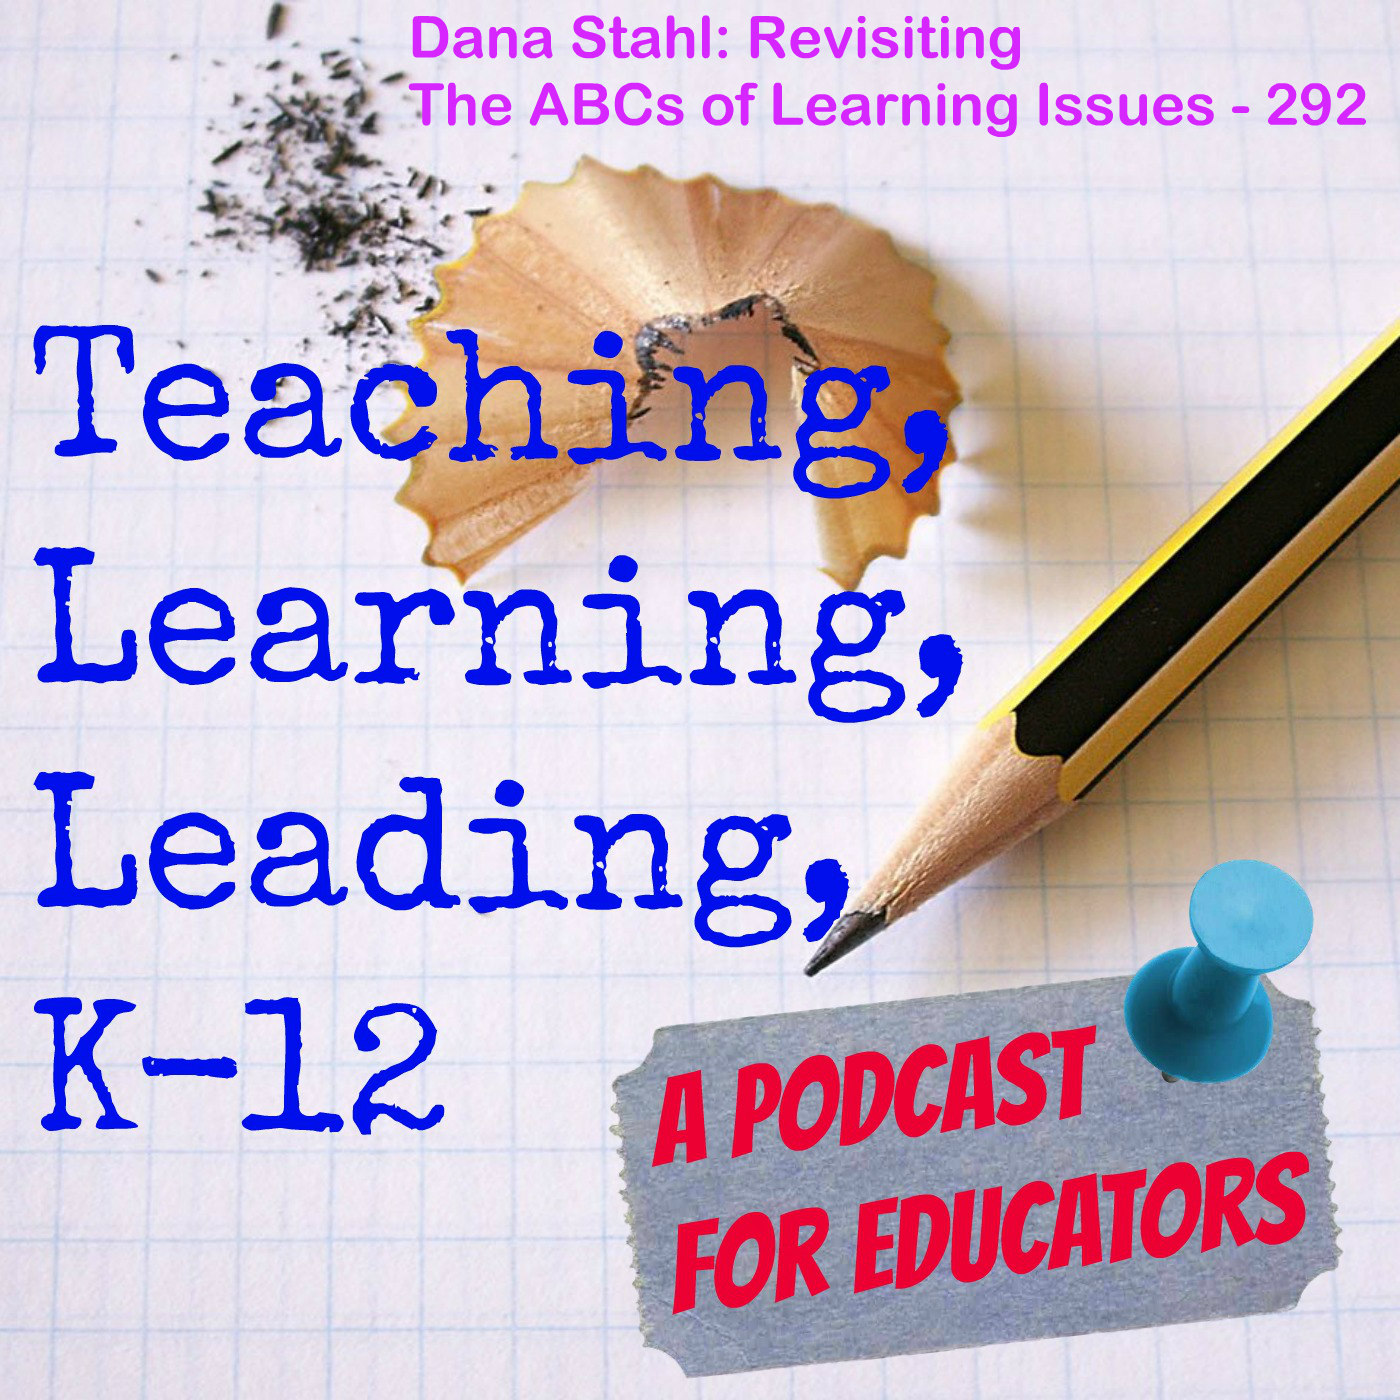 Dana Stahl: Revisiting The ABCs of Learning Issues - 292 Image